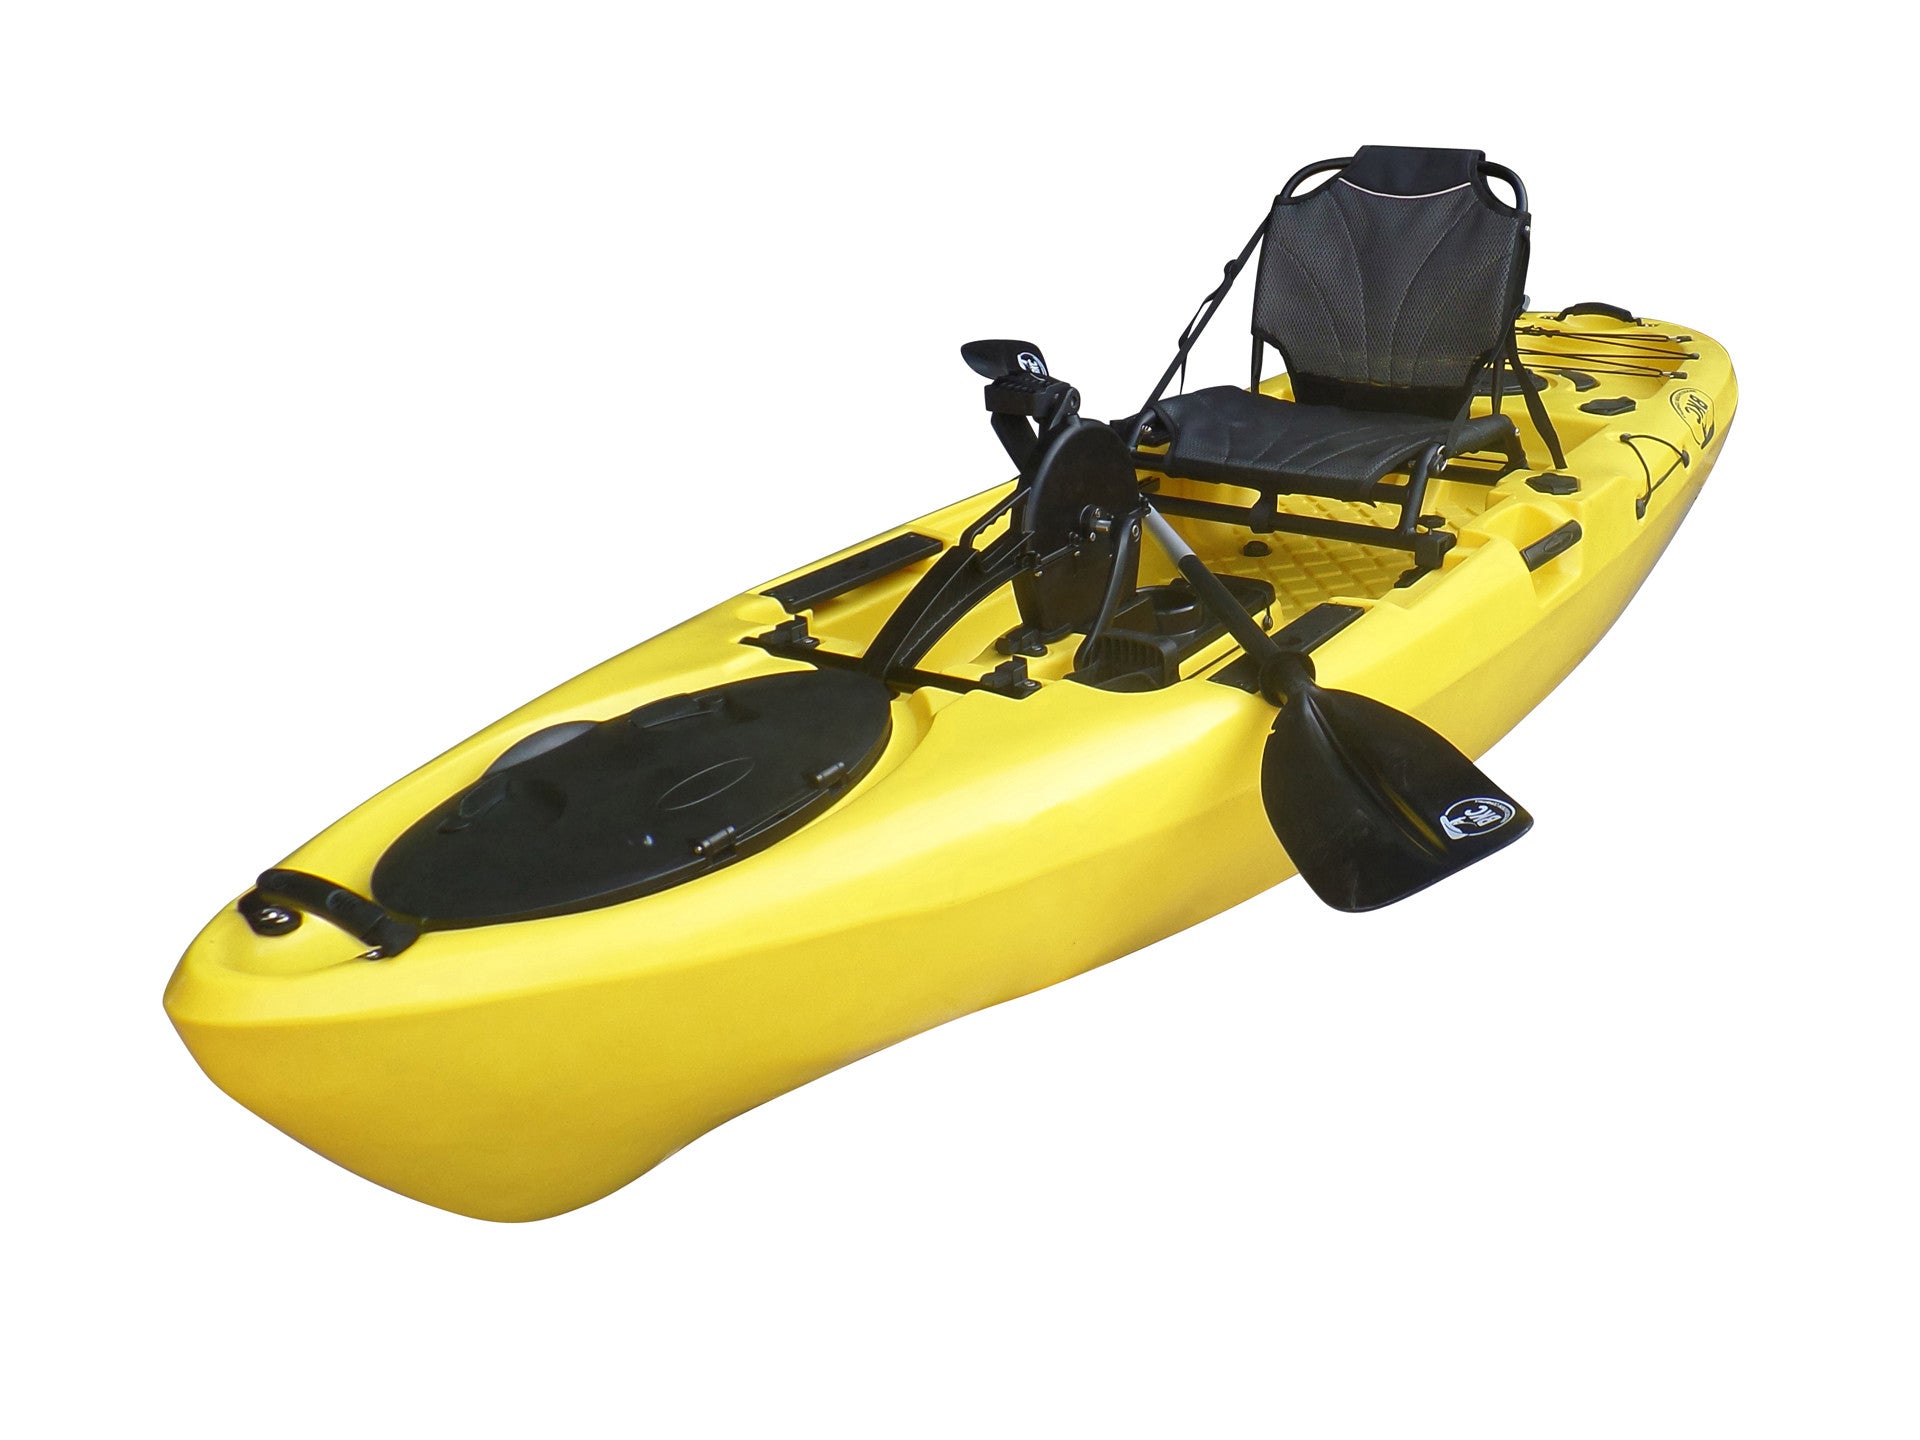 Dipping your toes into Pedal Kayaking: A Beginner's Guide